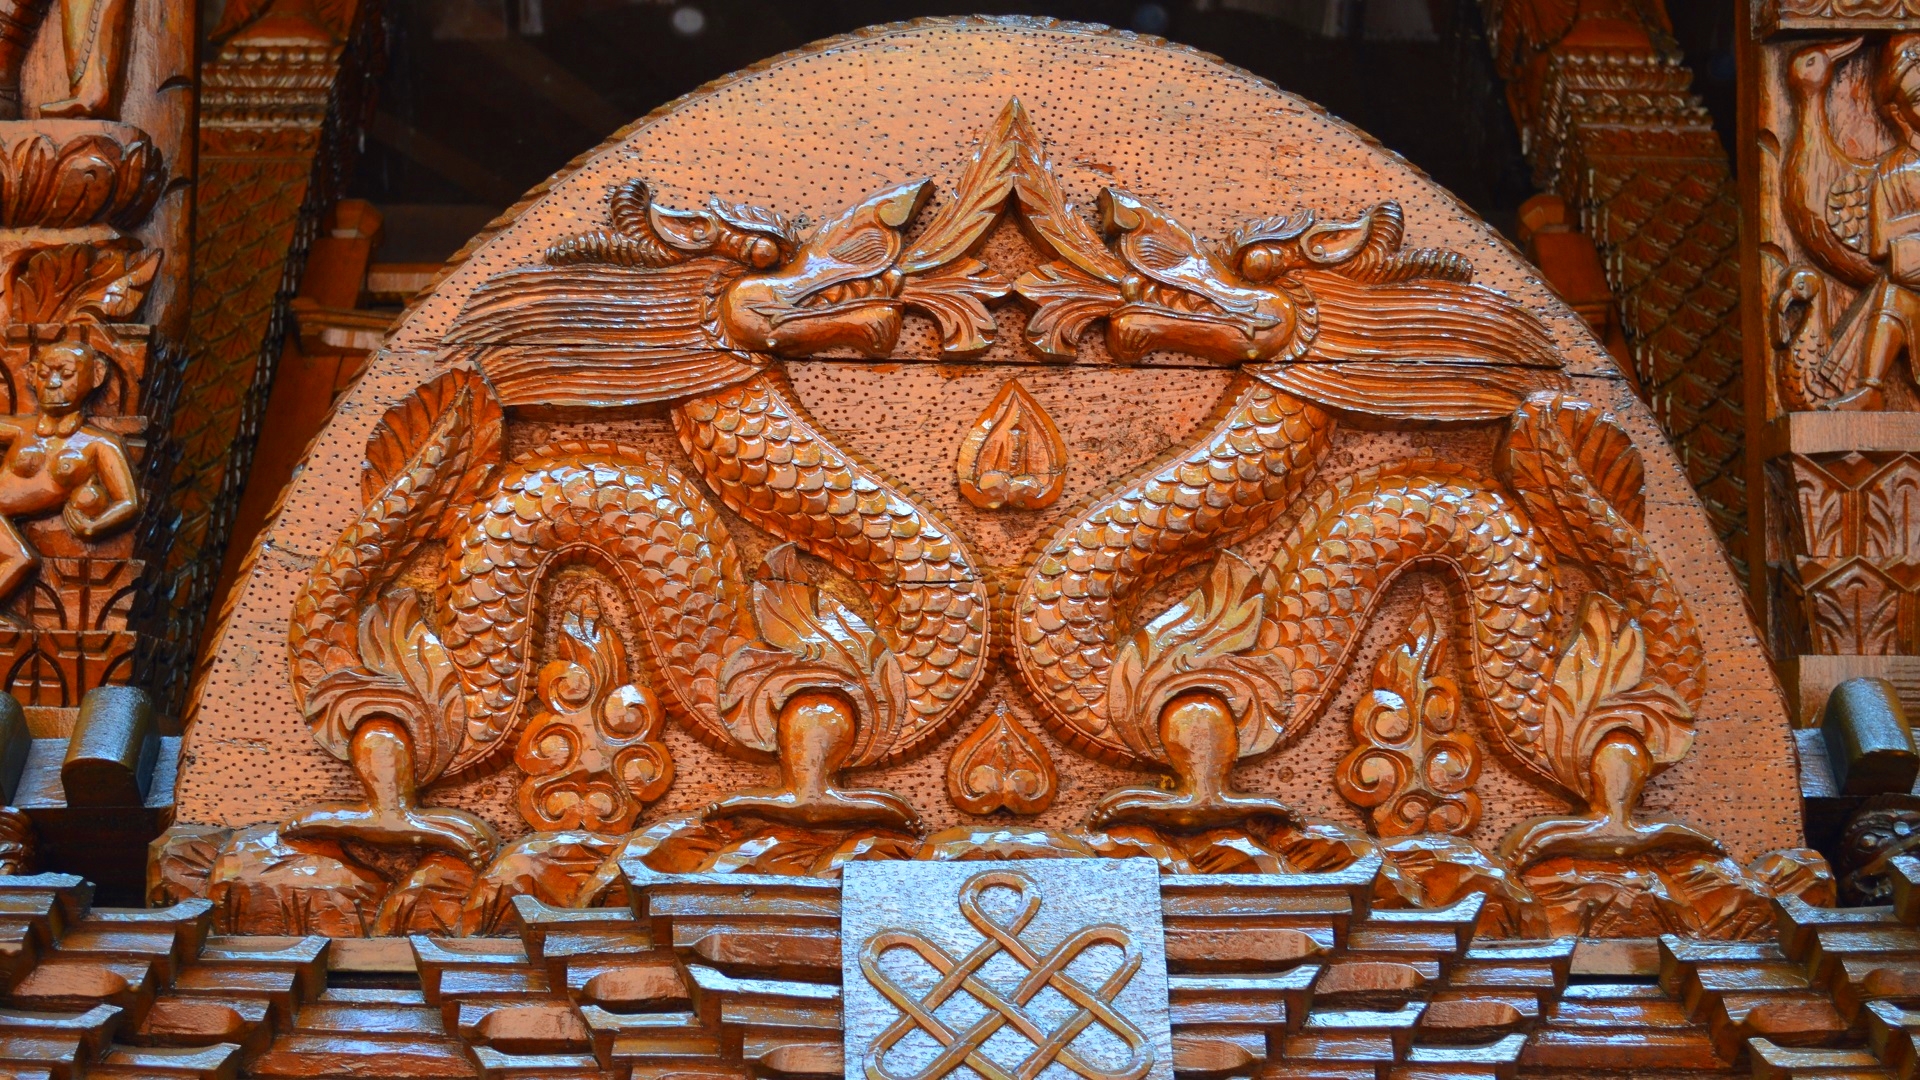 Brisbane Building Carving Dragon Nepalese Pagoda Photography Wood 1920x1080